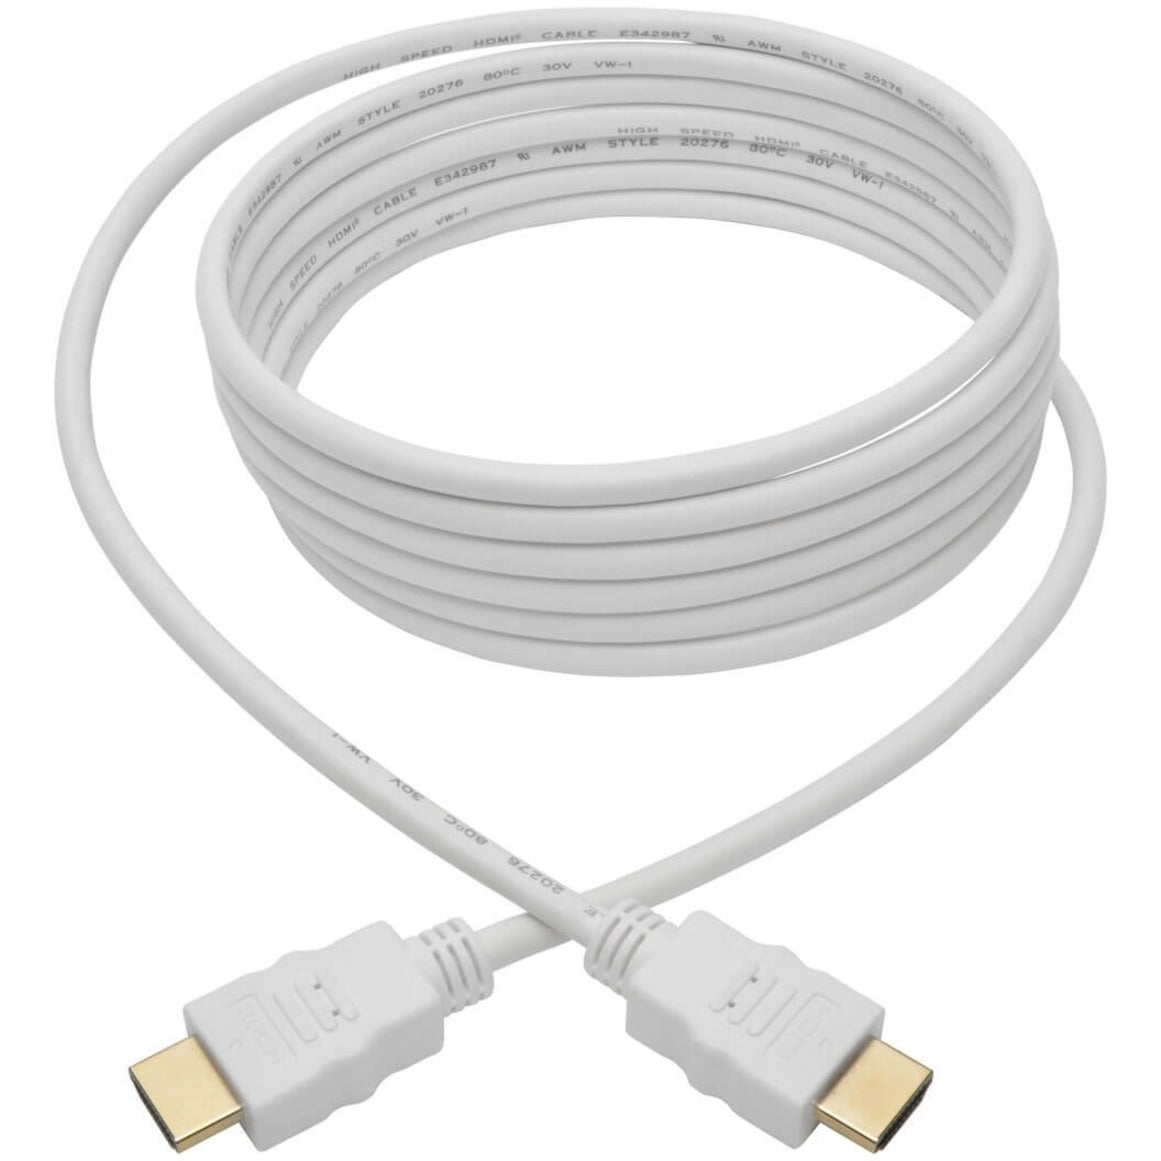 Tripp Lite P568-010-WH High-Speed HDMI 4K Cable (M/M), White, 10 ft.